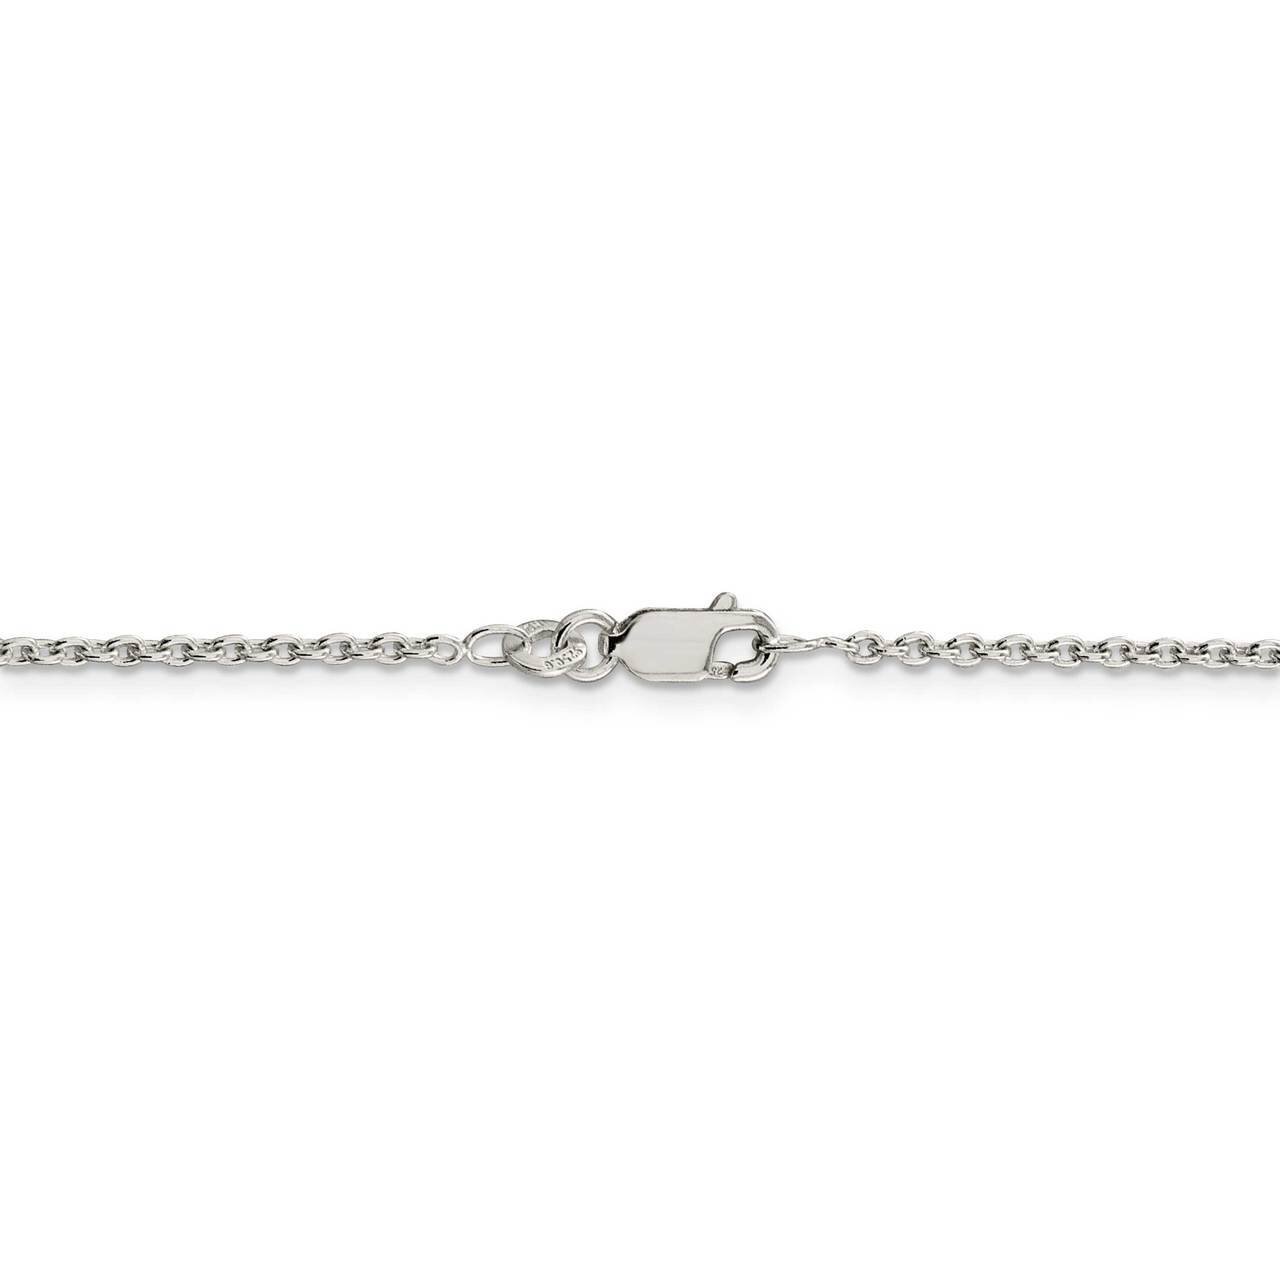 7.5 Inch 1.95mm Cable Chain Sterling Silver QCL050-7.5